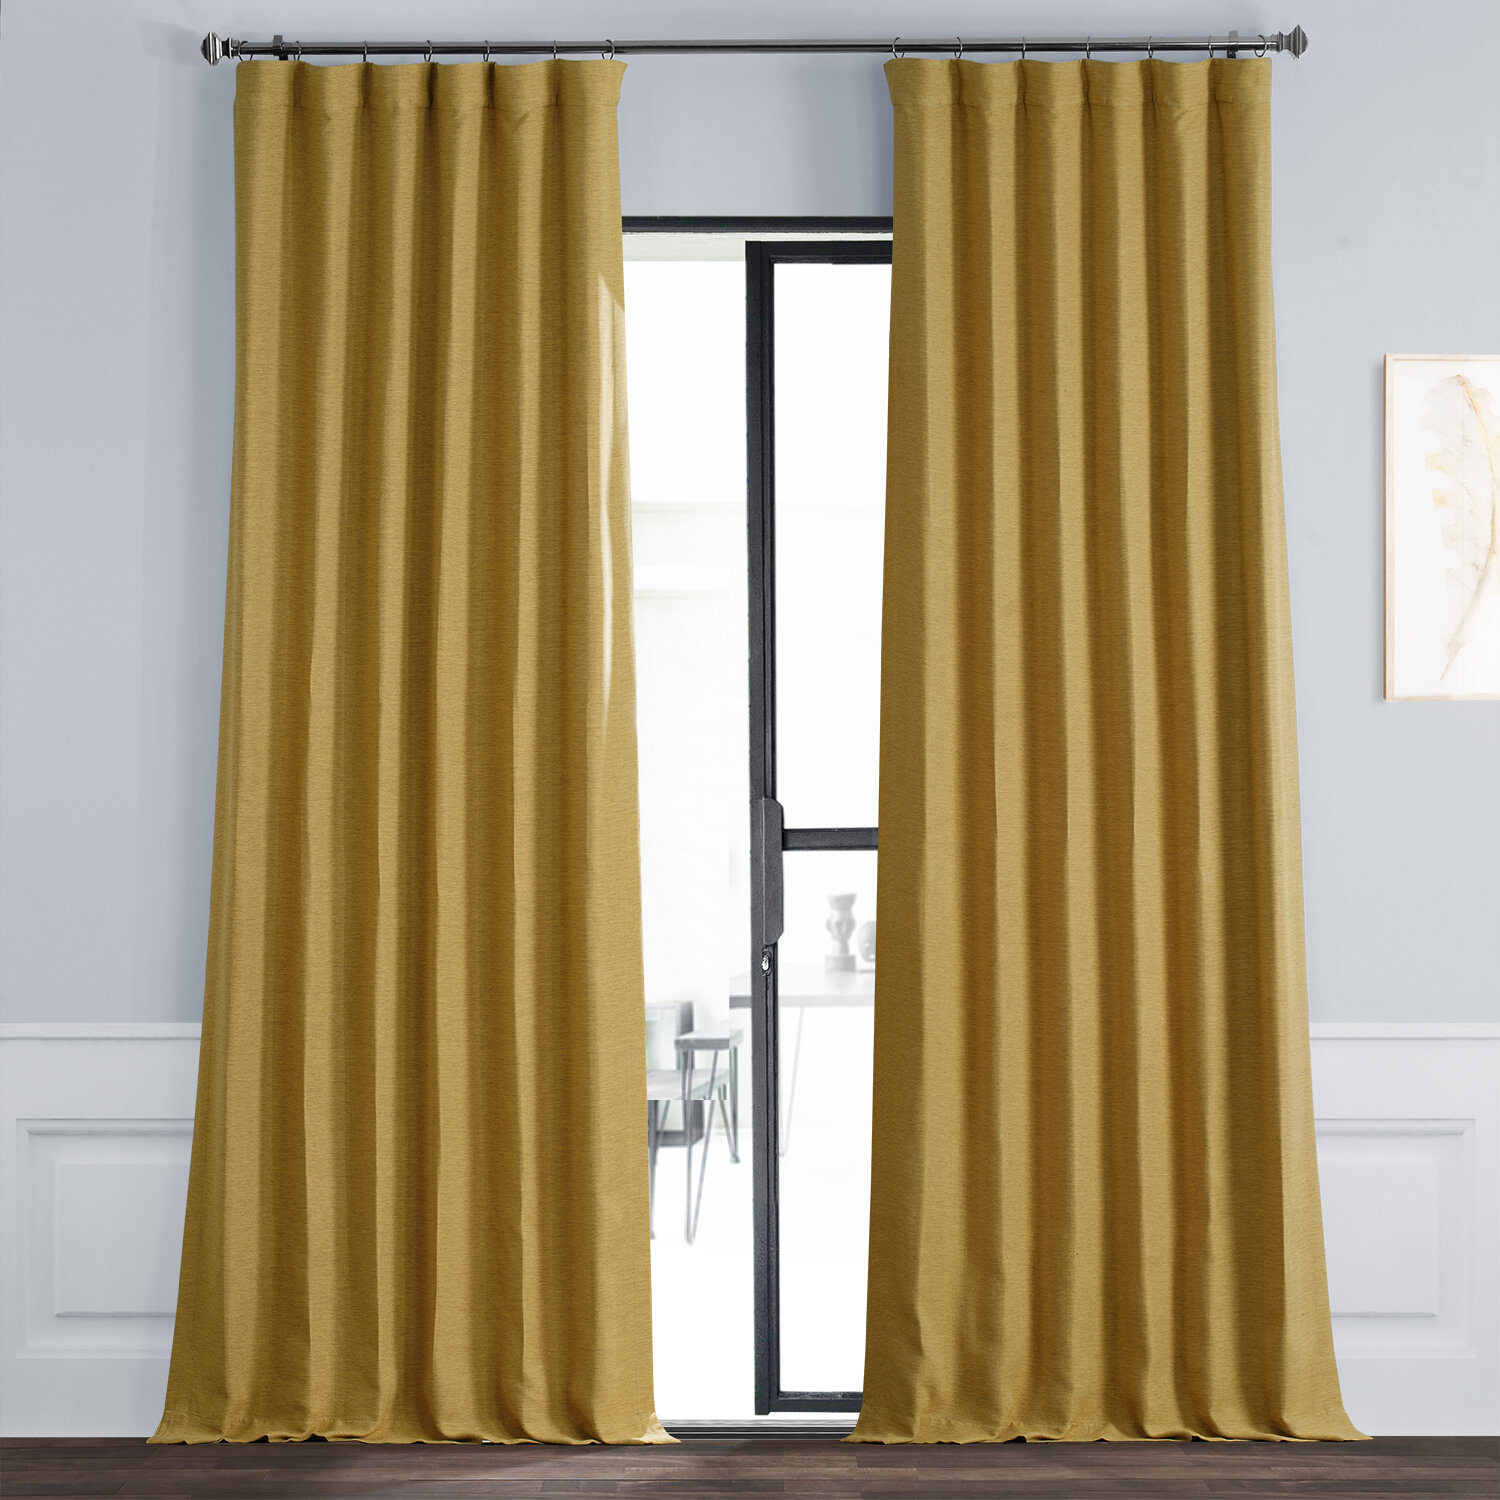 PAIRS OF  GOLD  OCHRE YELLOW TEXTURED  EYELET BLOCK OUT LIGHT LINED CURTAINS 